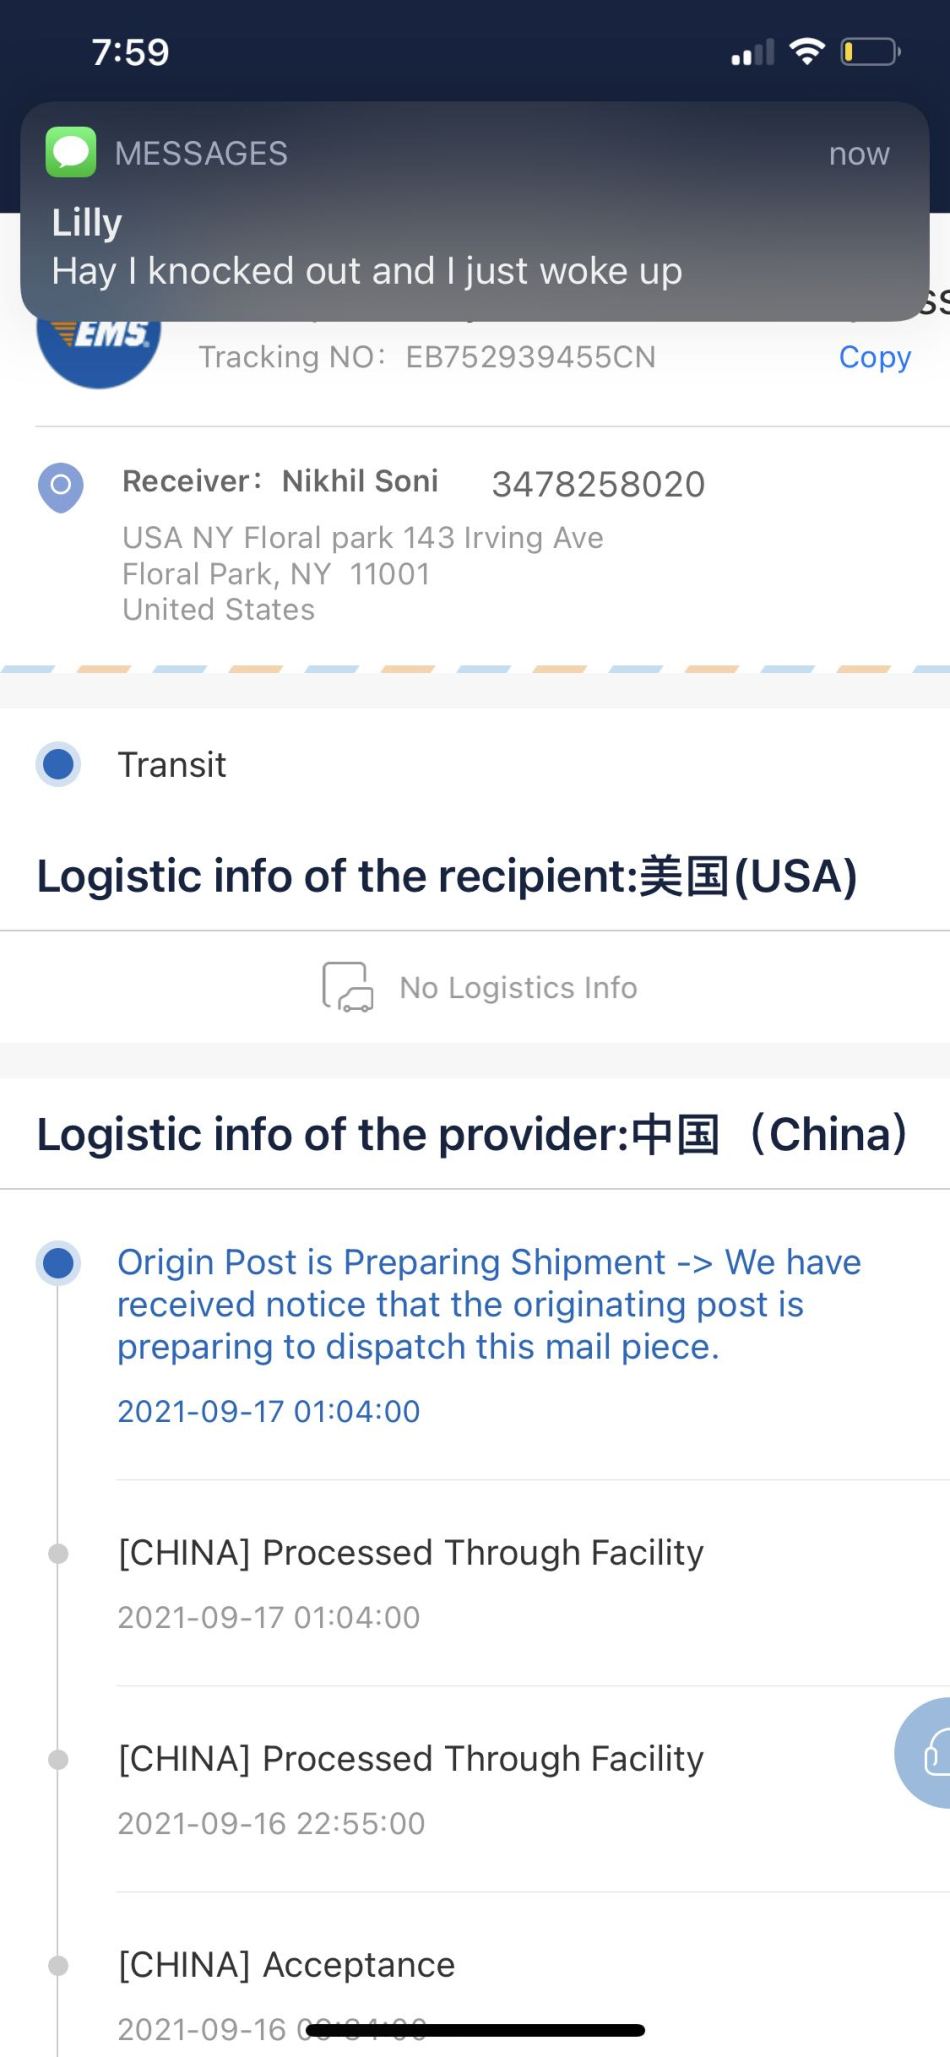 https://img1.superbuy.com/images/consult/2021/09/18/53779bdded08037a27bfc3fac04f3cdd.jpg?x-oss-process=image/resize,w_950